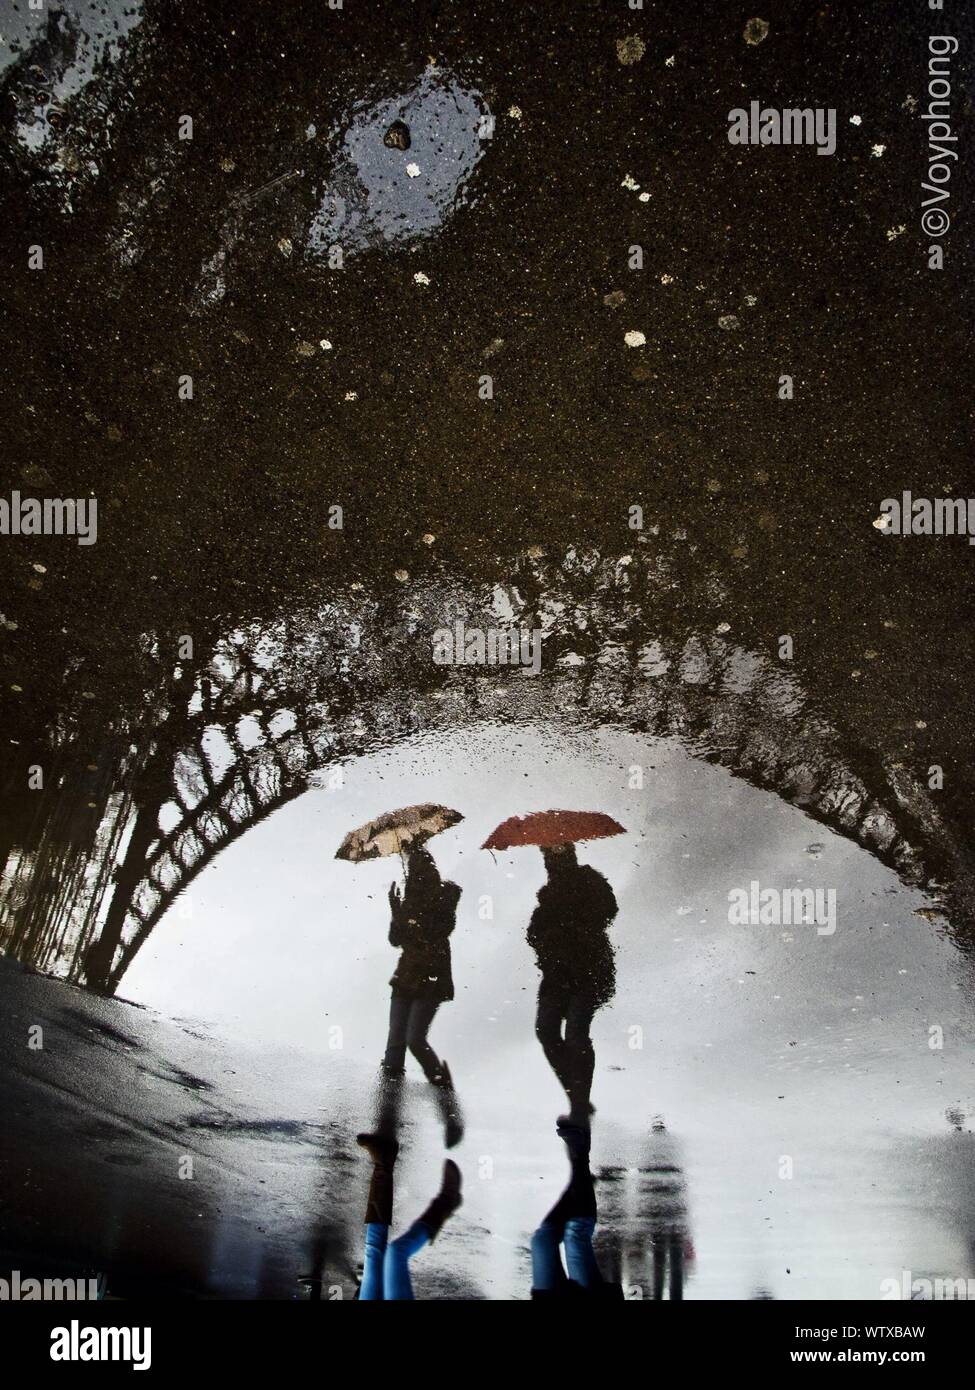 Reflection Of Eiffel Tower And Two People In Puddle Water Stock Photo